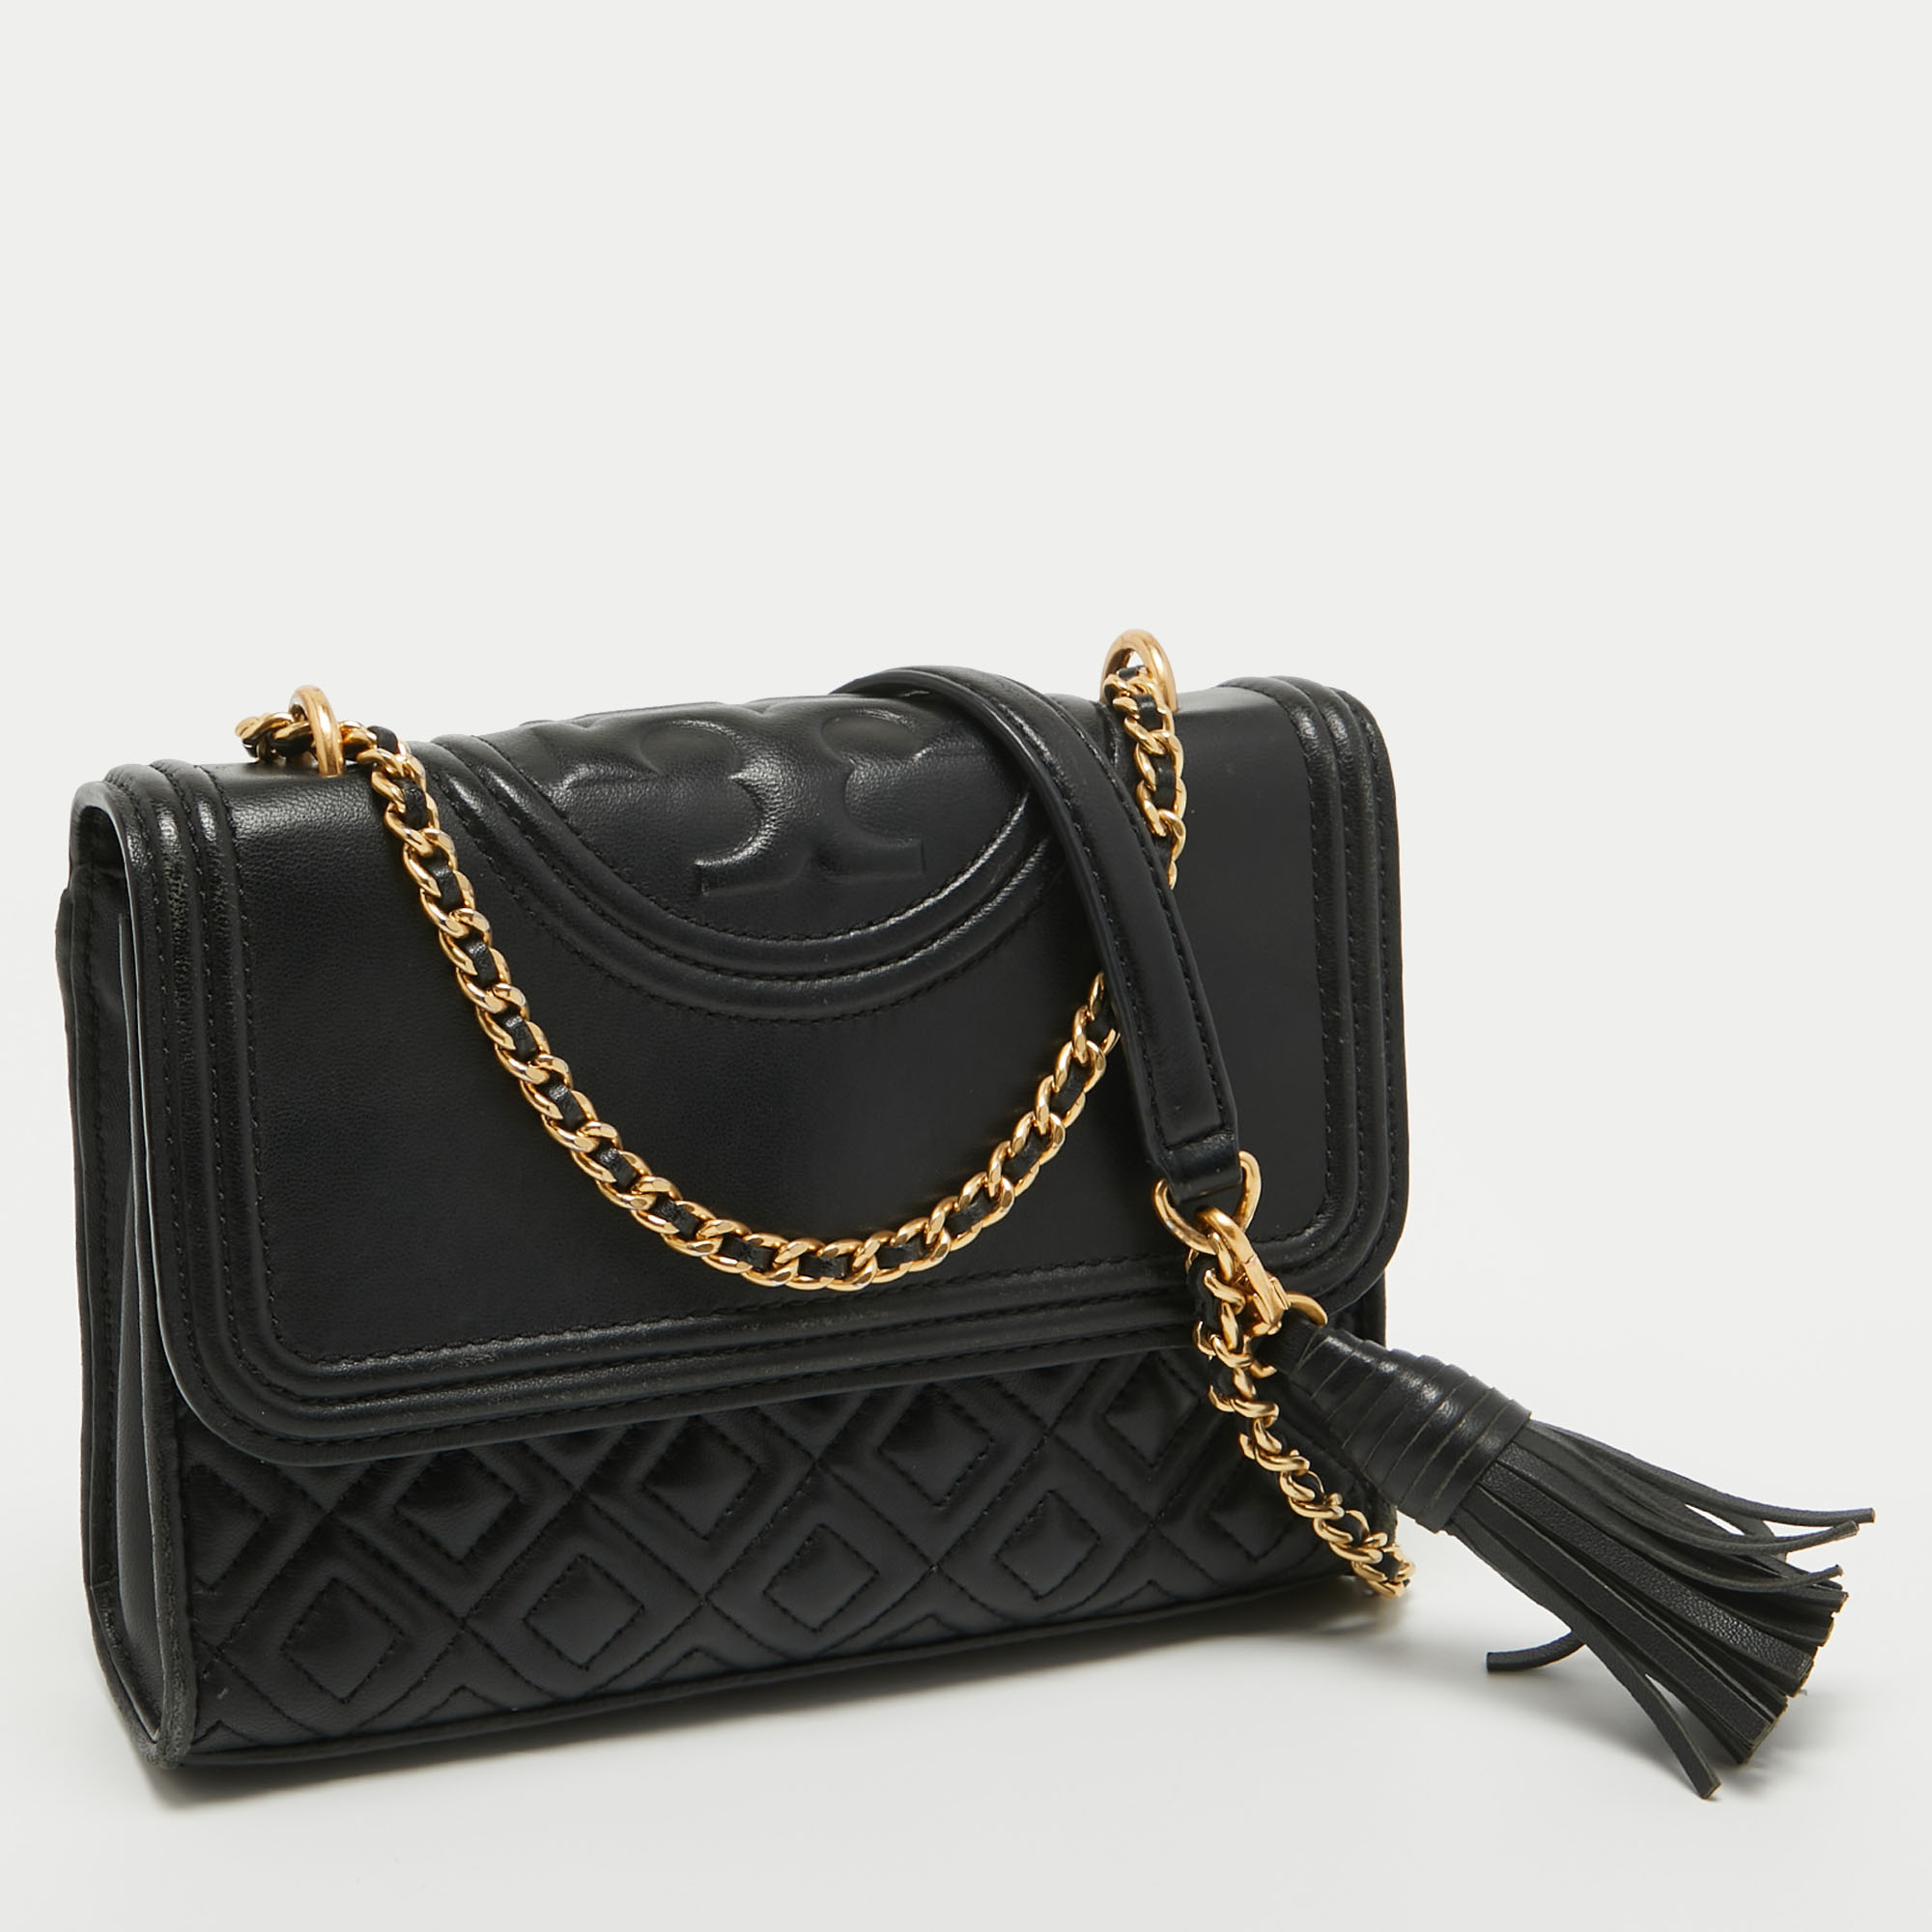 Tory Burch Black Leather Small Fleming Shoulder Bag